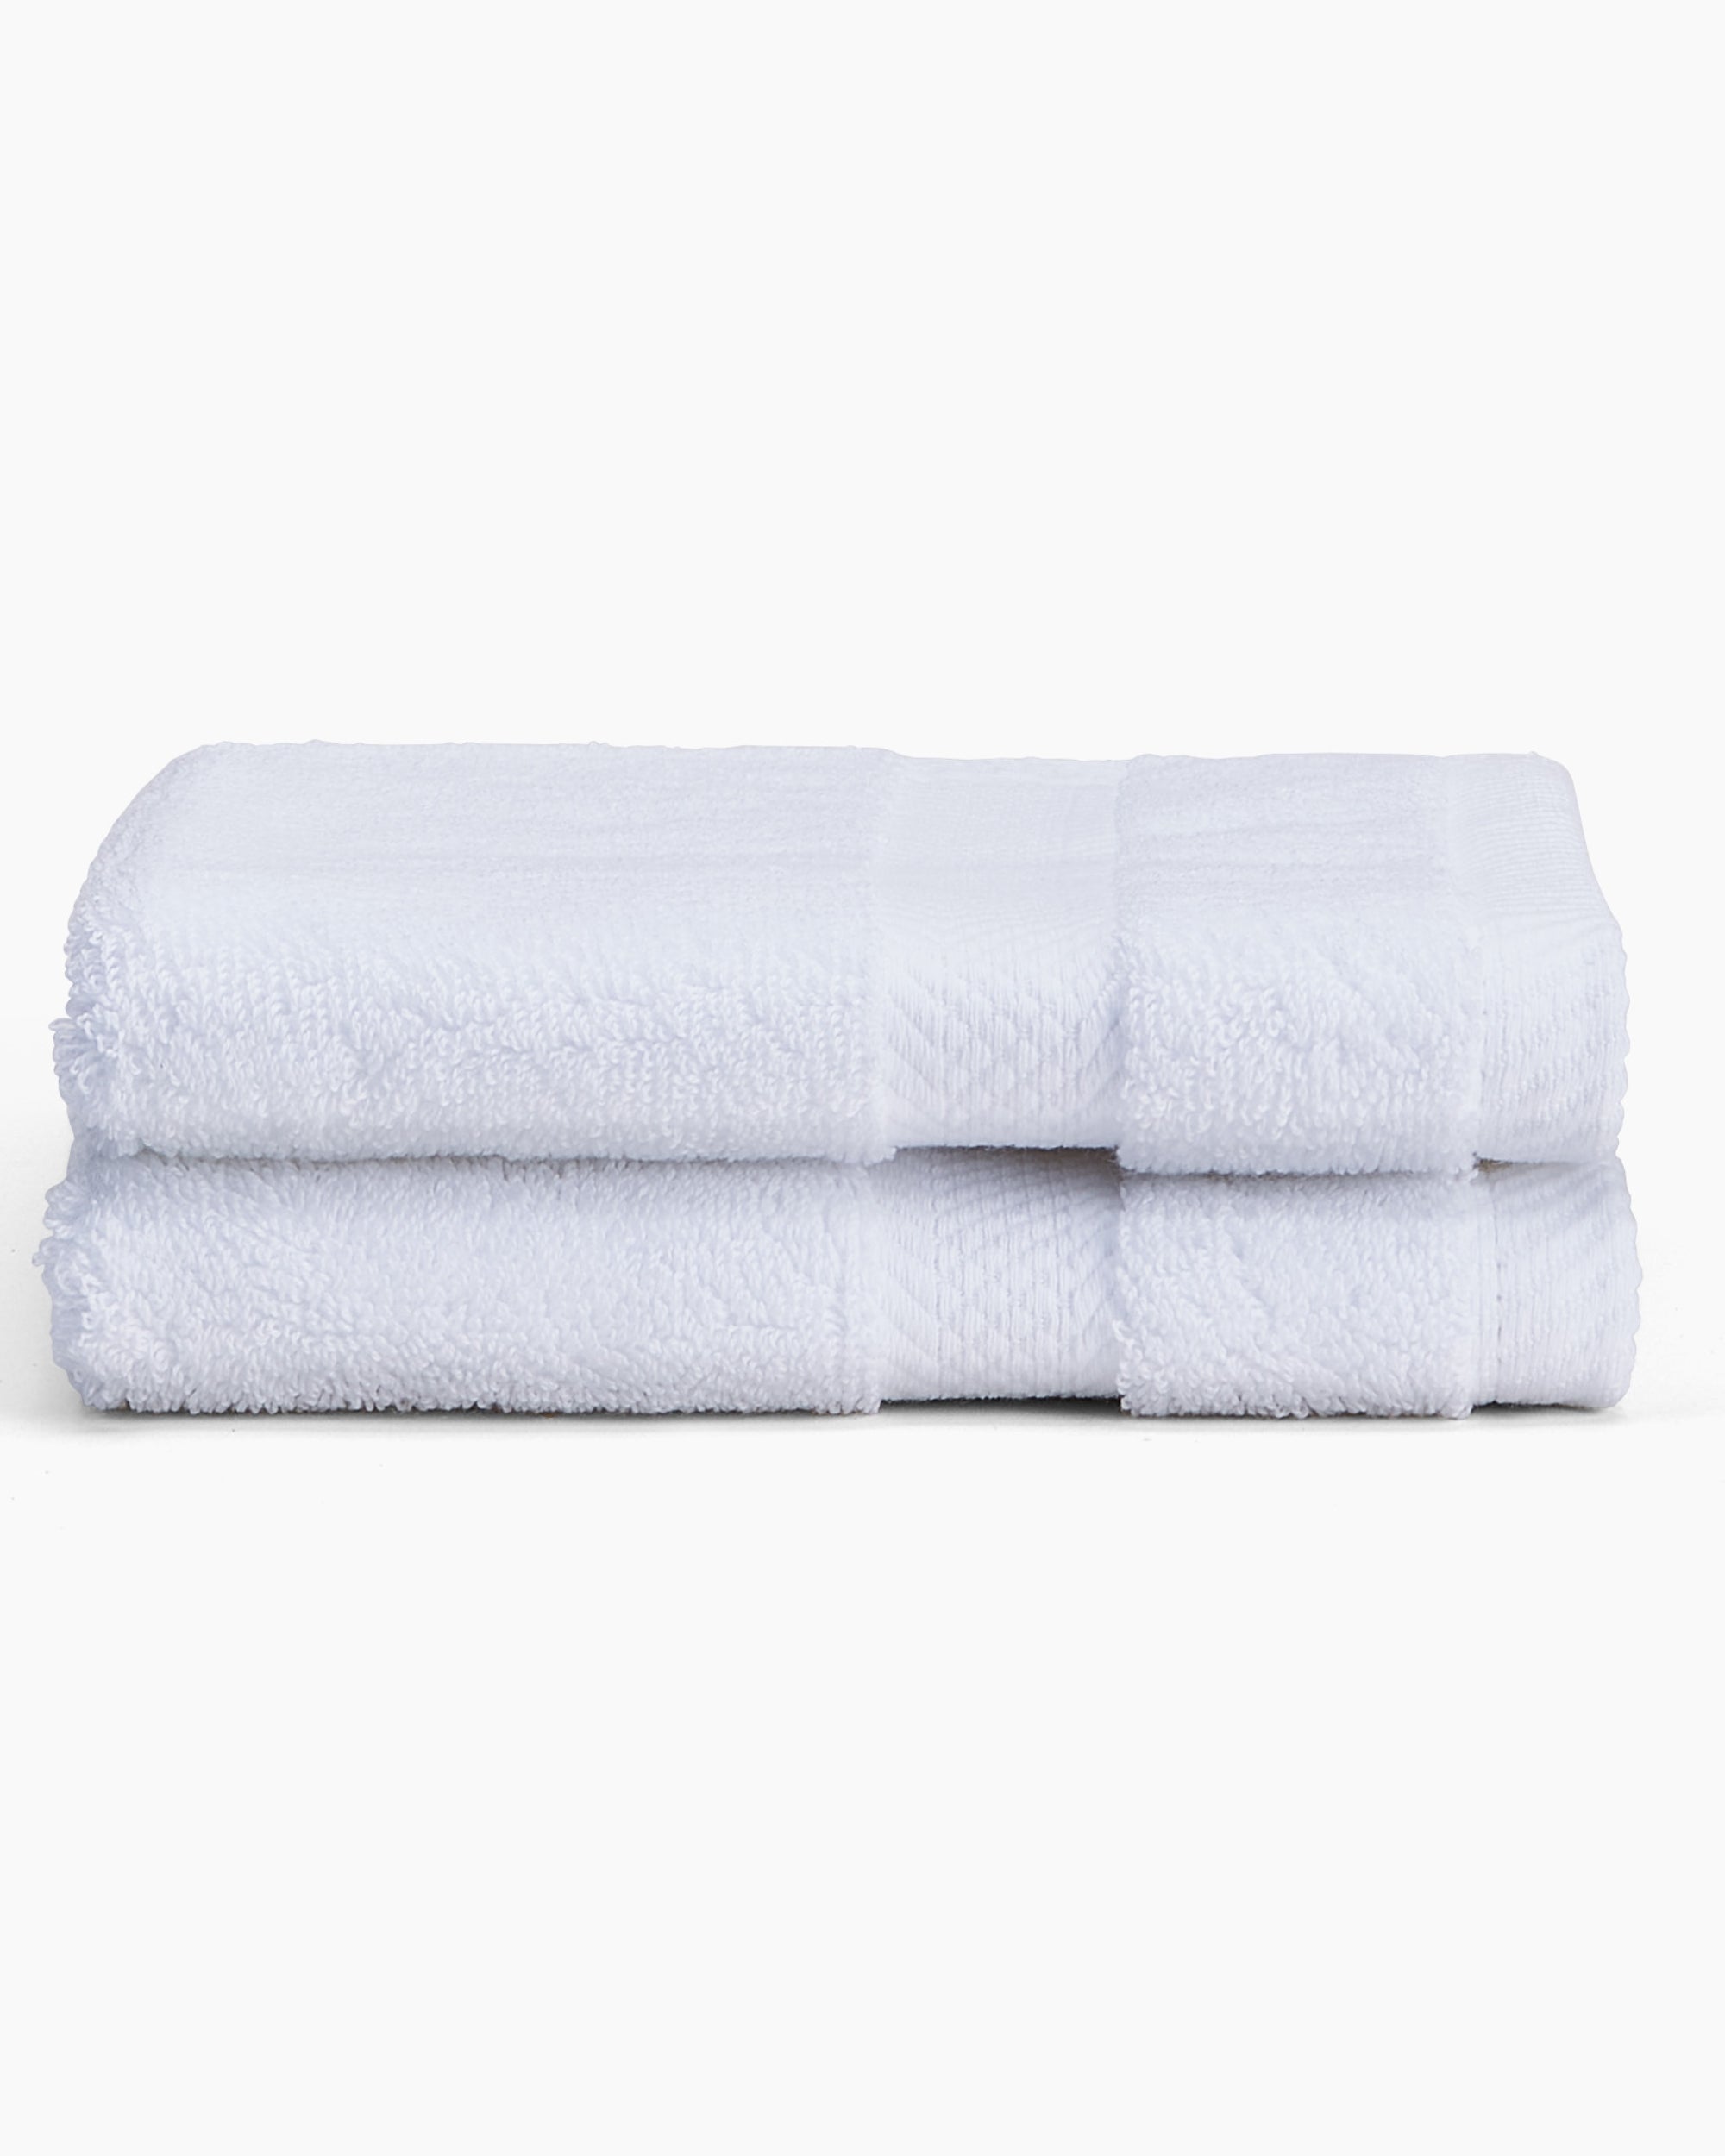 https://authenticity50.com/cdn/shop/products/super-soft-absorbent-plush-made-in-america-cotton-wash-cloths.jpg?v=1674154920&width=2000